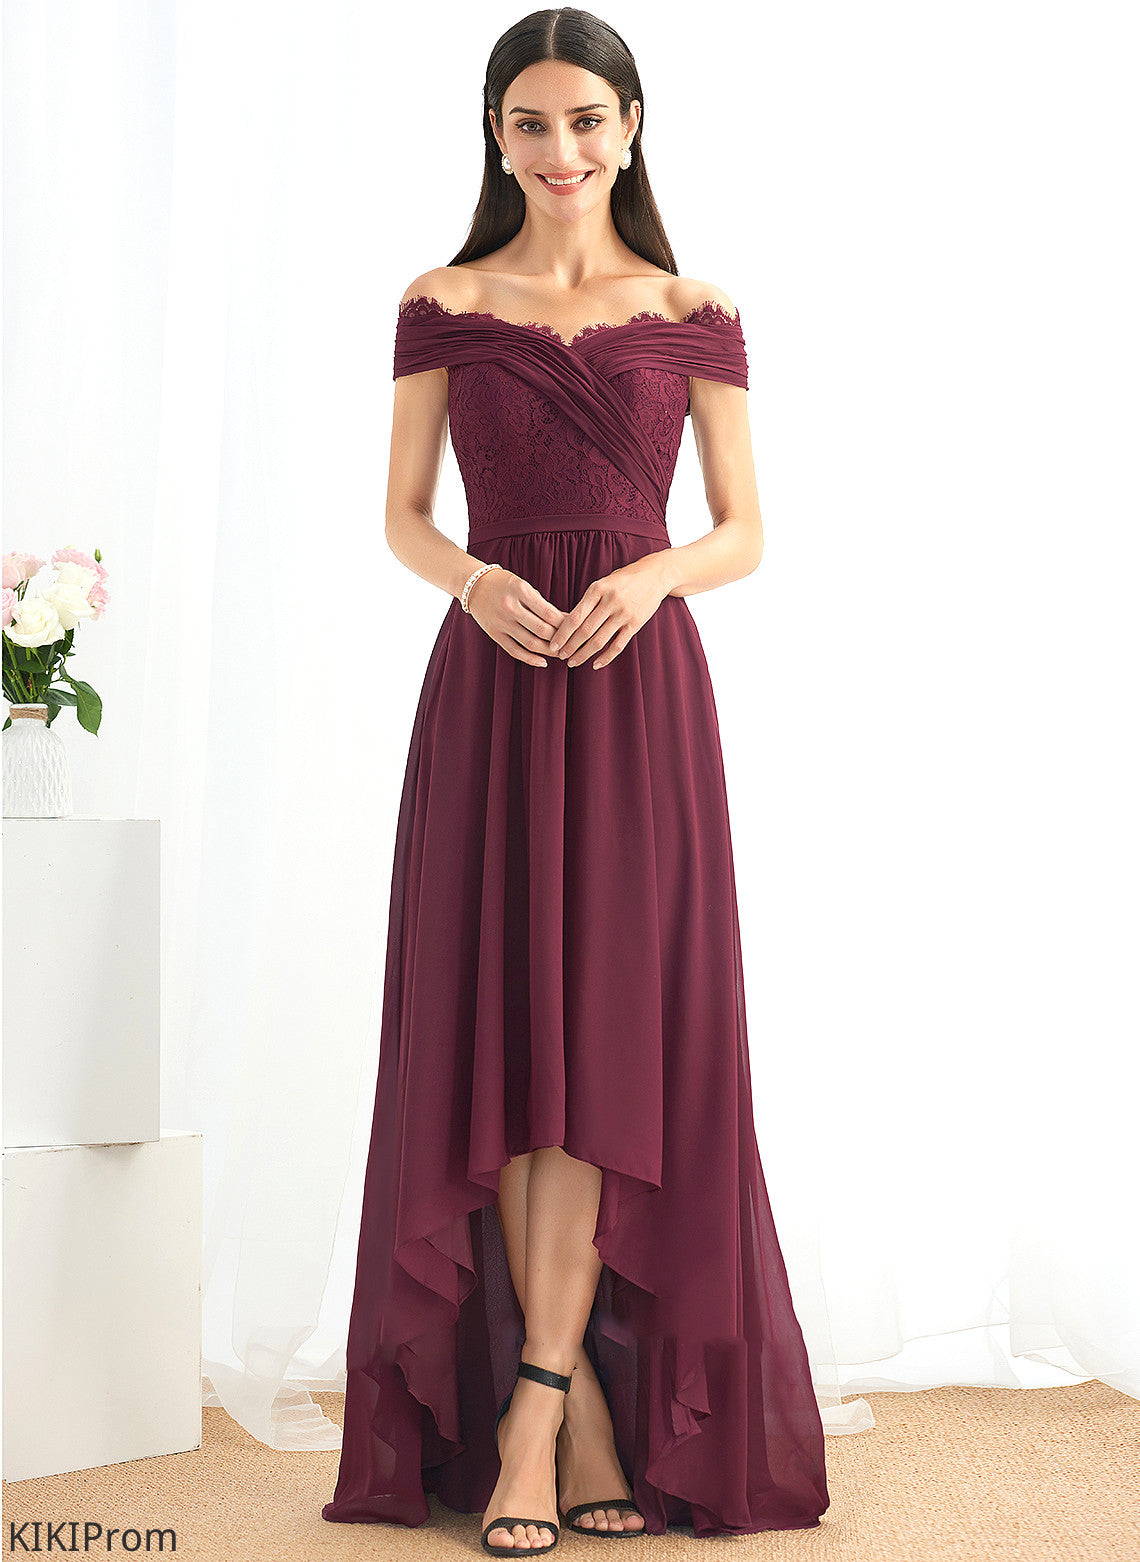 Embellishment Silhouette Neckline Lace Fabric Off-the-Shoulder Length A-Line Asymmetrical Shaylee Sleeveless Scoop Bridesmaid Dresses